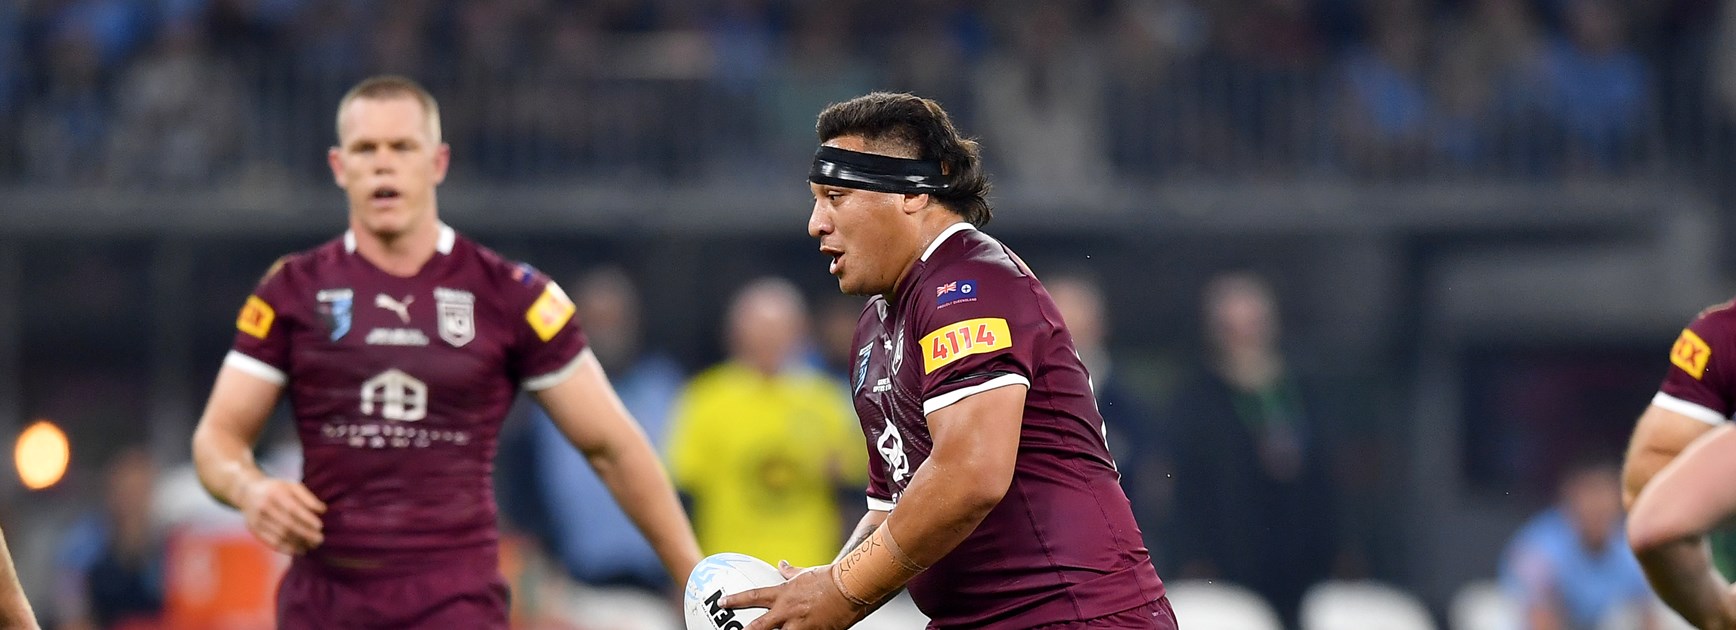 Maroons and XXXX spotlight more communities in decider